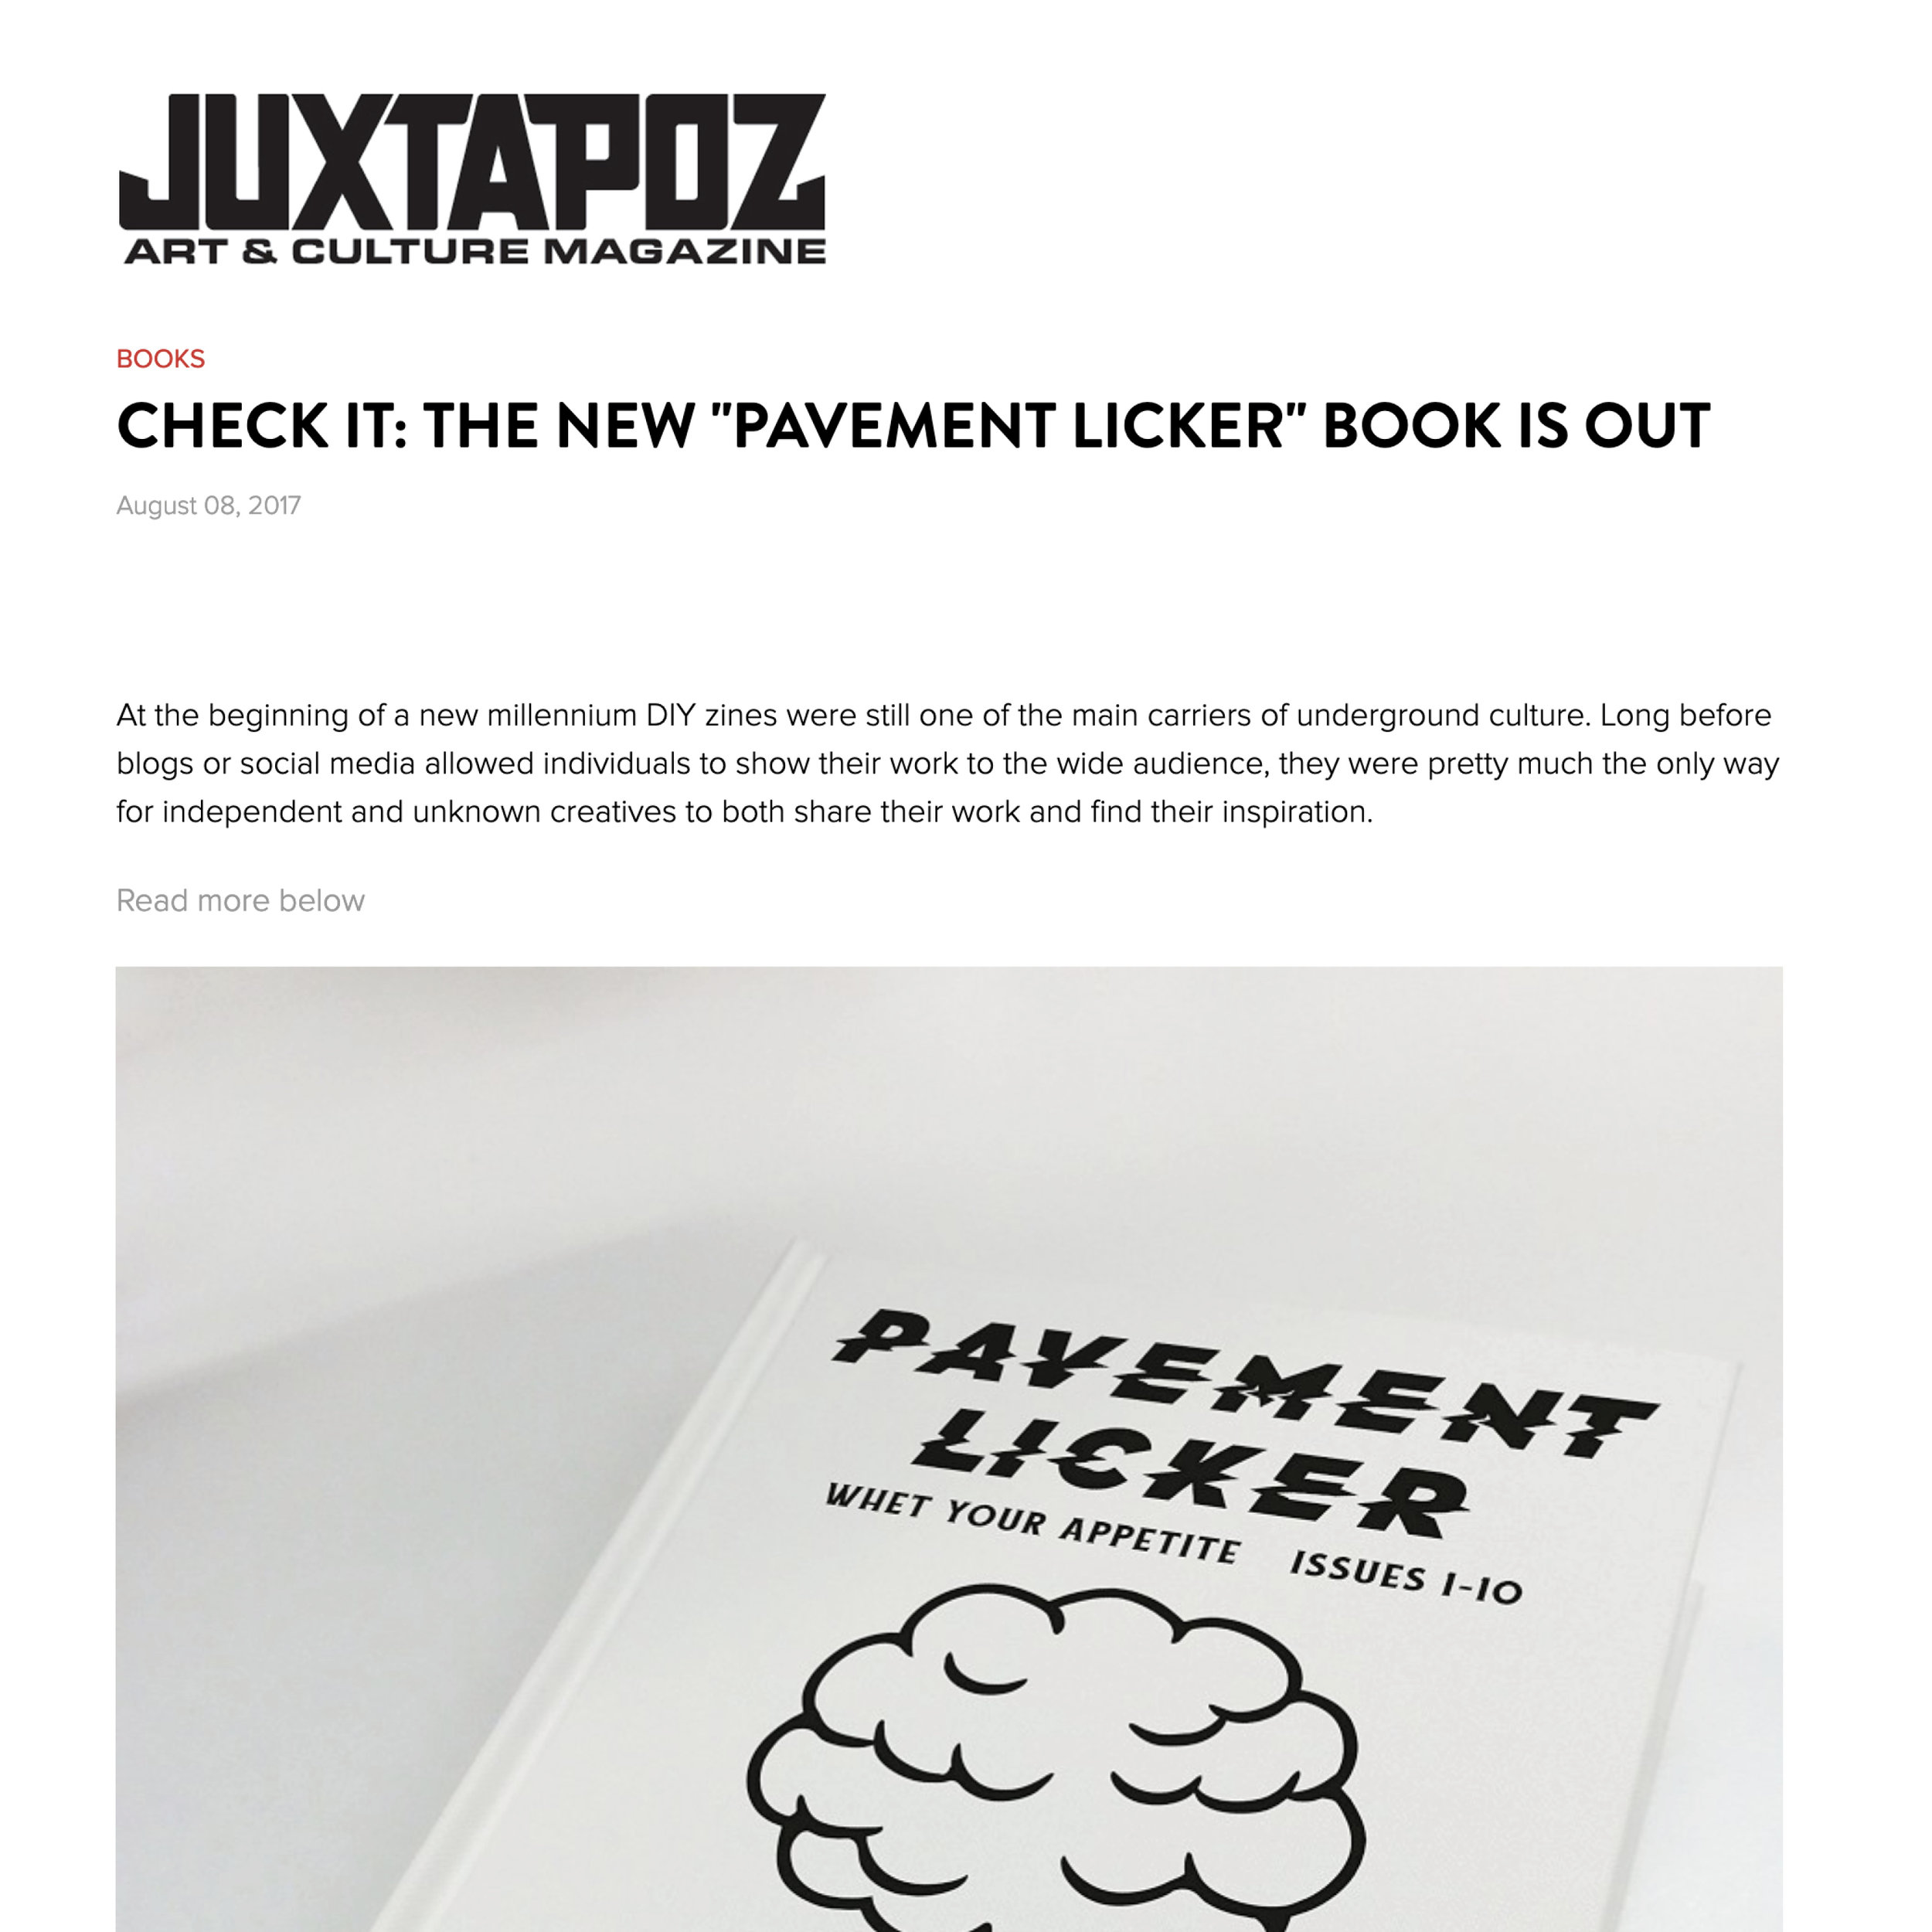 Pavement Licker book featured by Juxtapoz